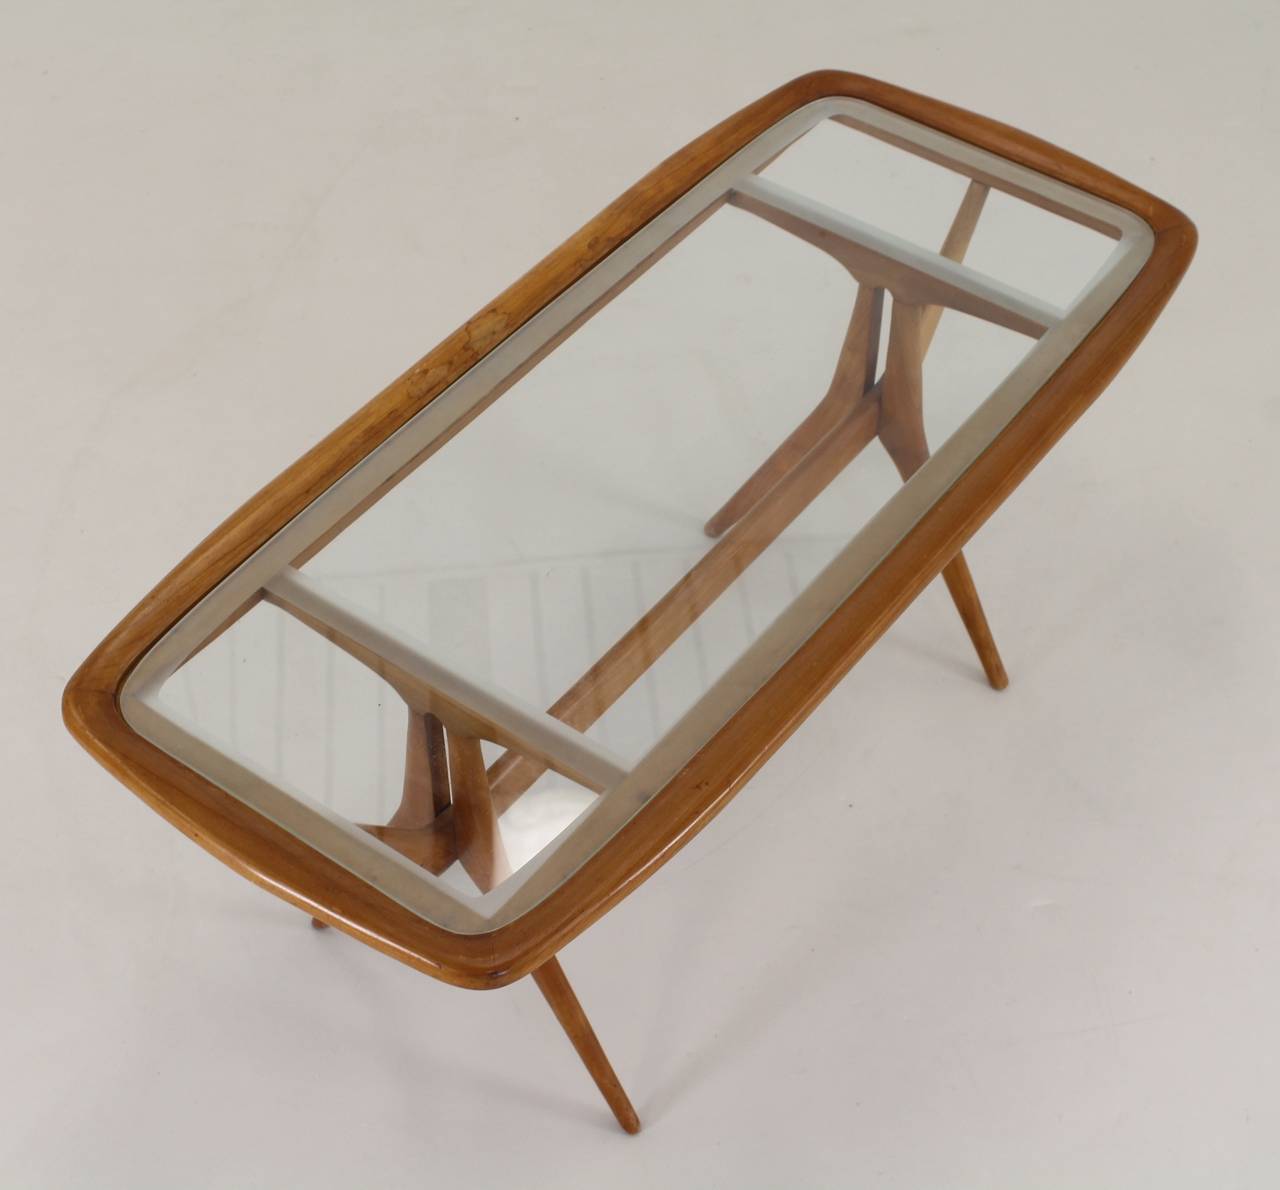 Elegant minimalistic coffee table
walnut with special treated glass
attributed to Cesare Lacca for Cassina, Italy.

Standard parcel shipment advised